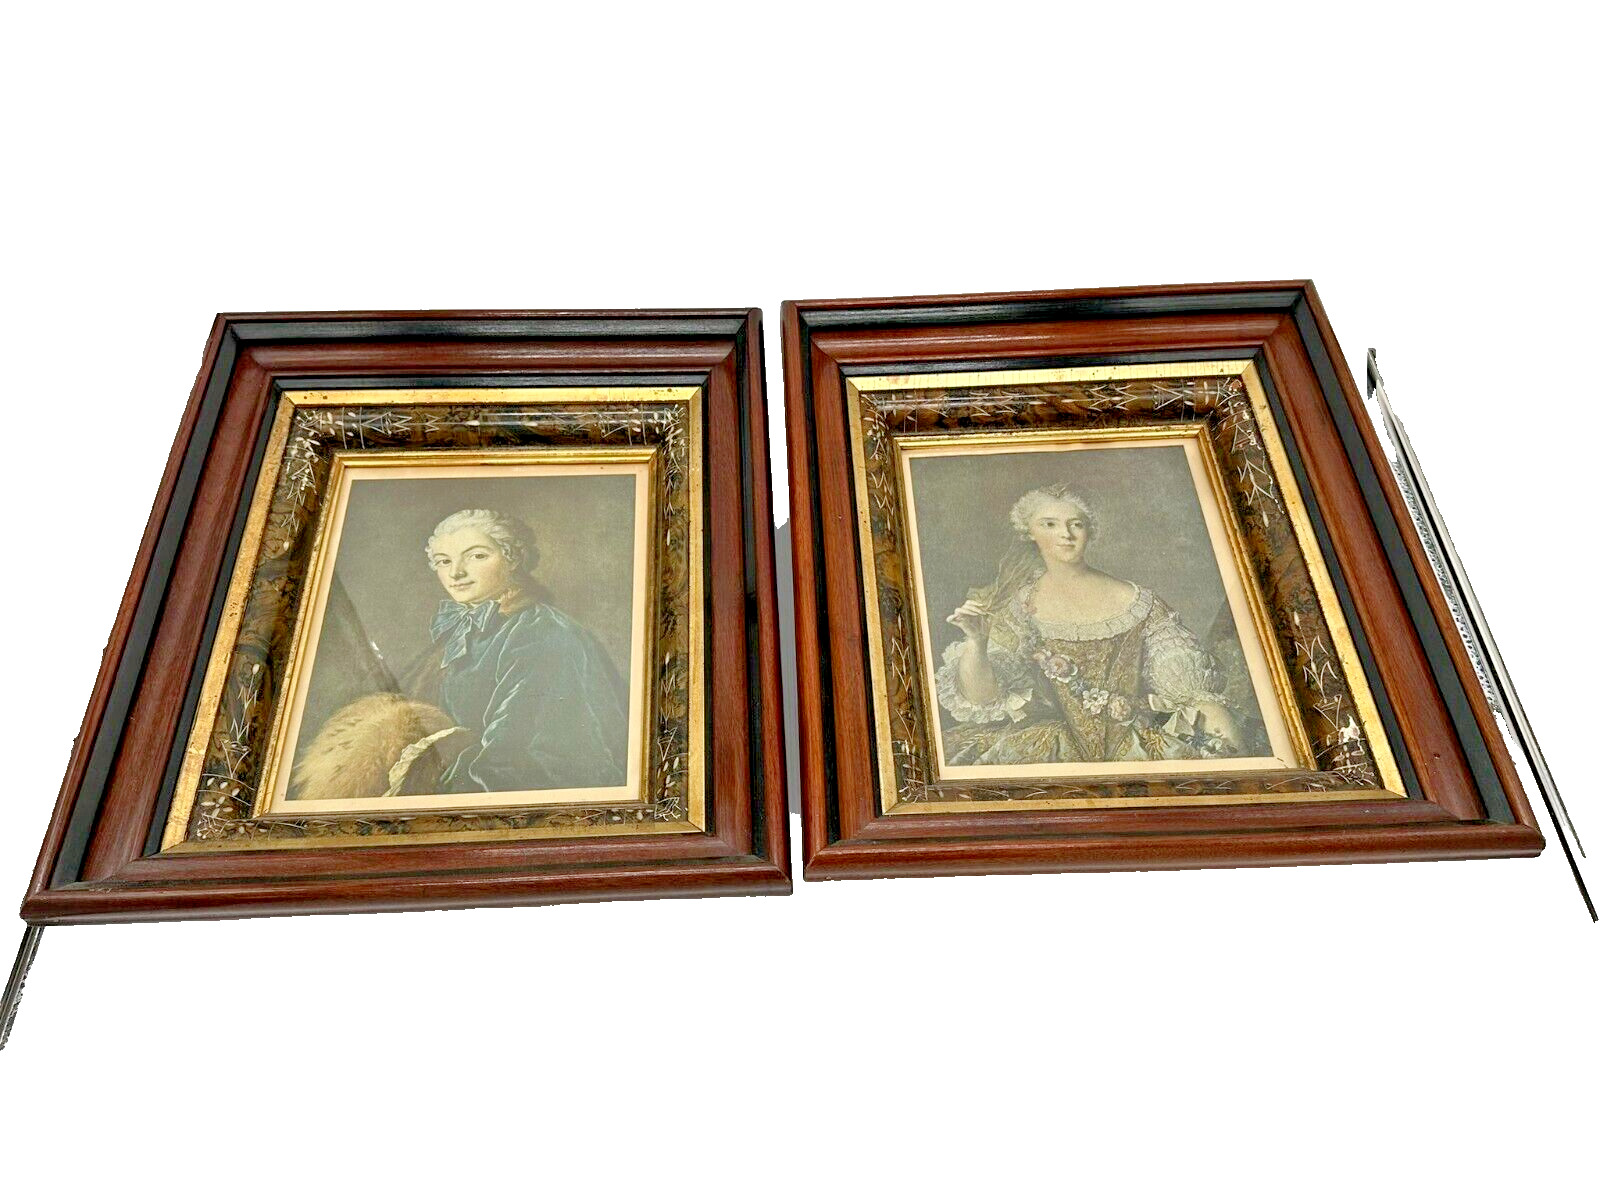 rare matching pair of Victorian deep walnut frames with gilt & faux  1870